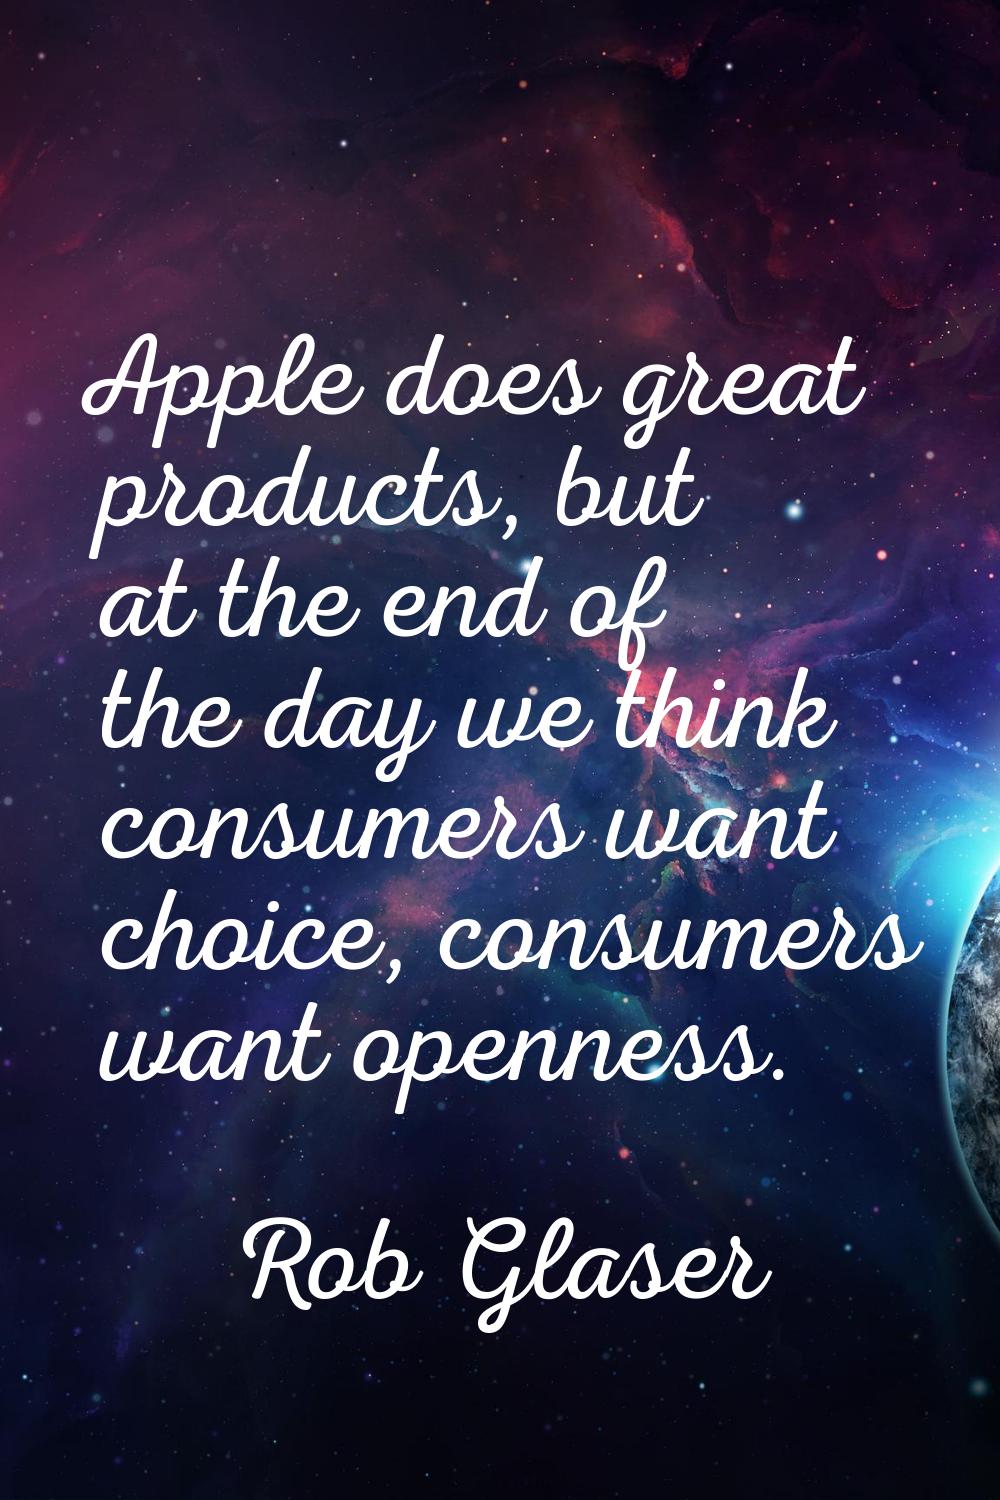 Apple does great products, but at the end of the day we think consumers want choice, consumers want